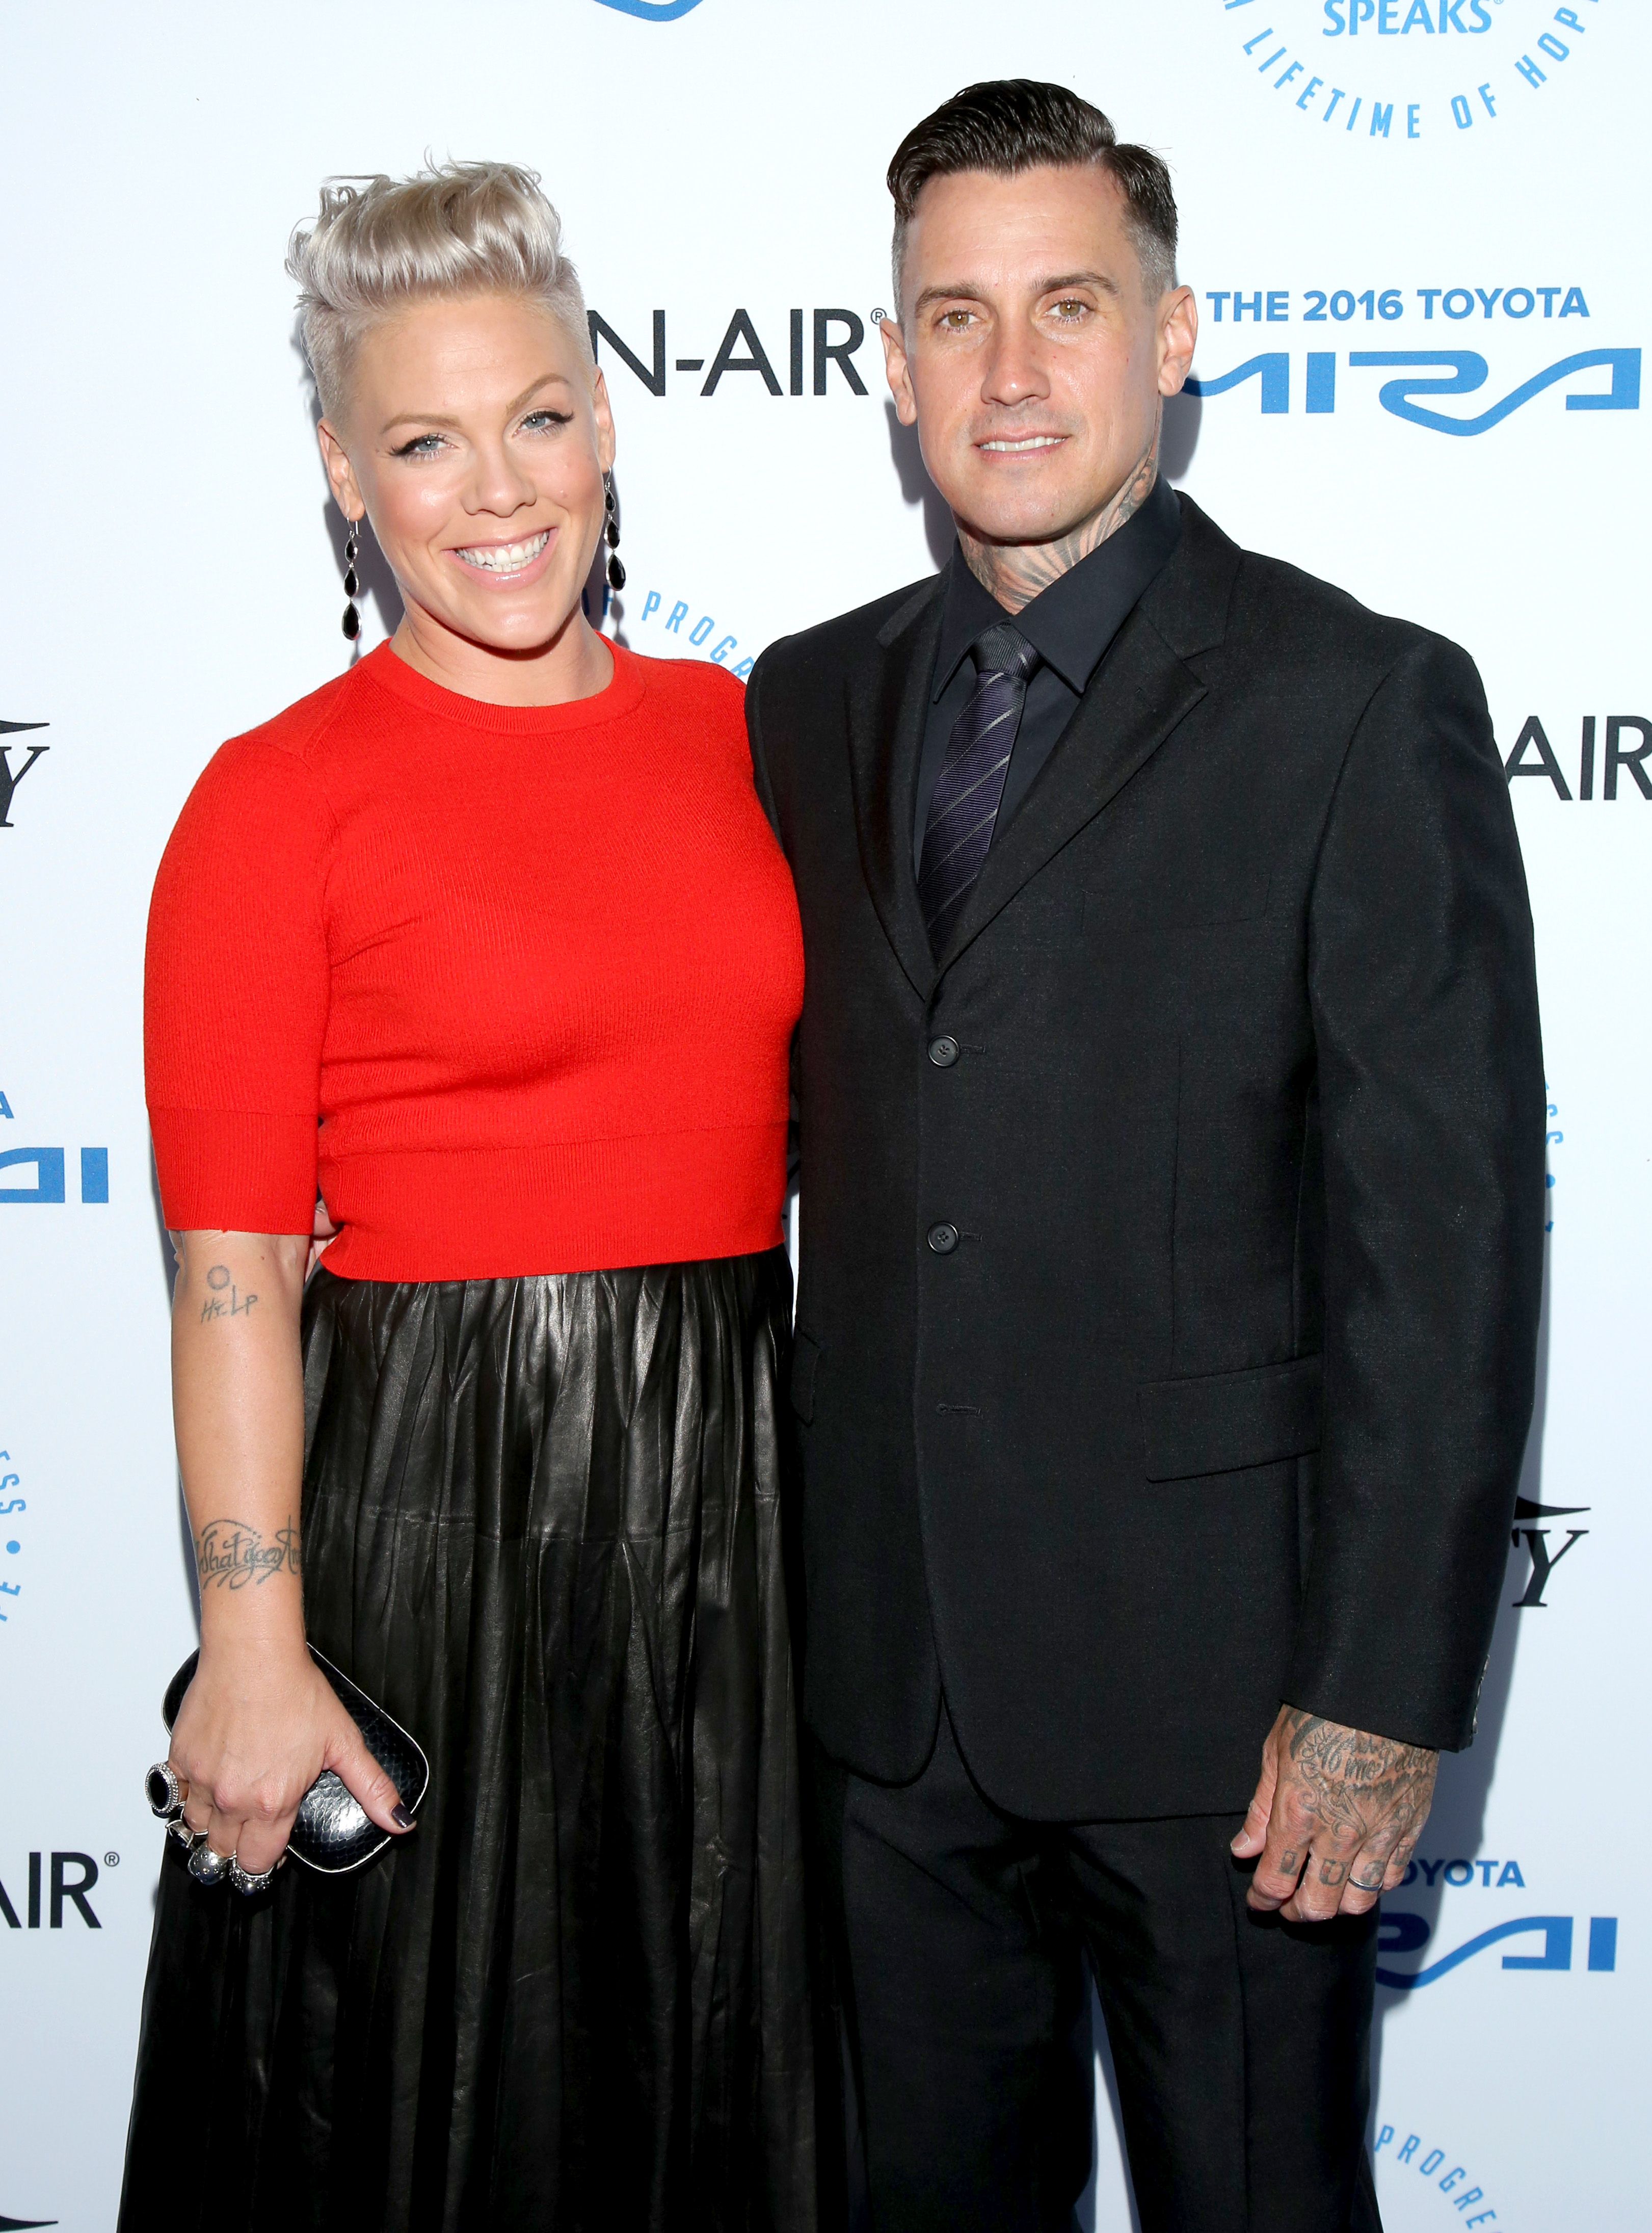 Pink's Kids: What To Know About Her 2 Children With Carey Hart